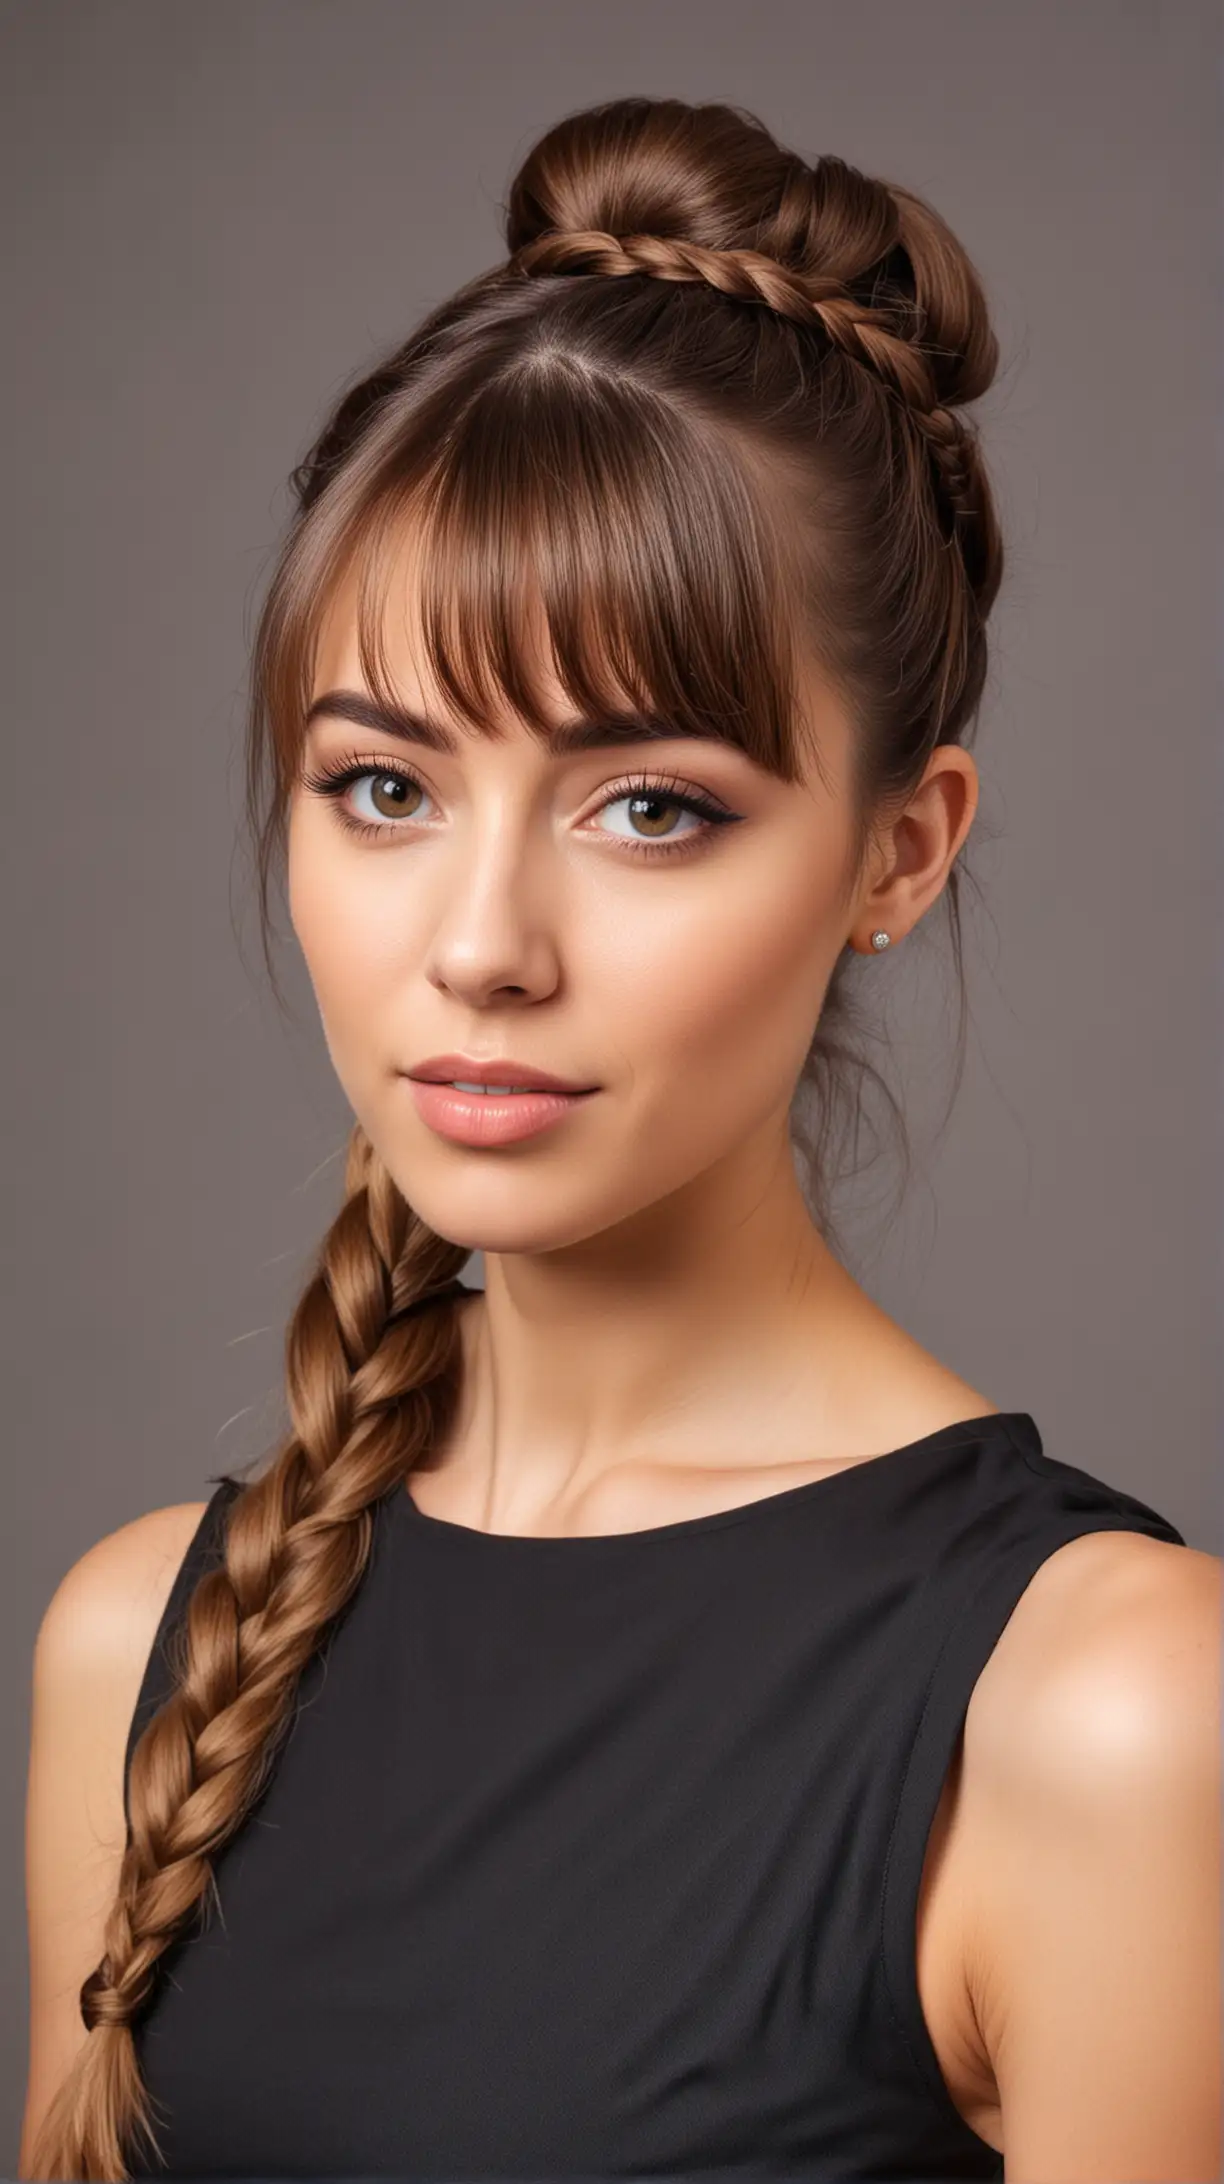 beautiful girl model, hairstyle - Braided Crown Ponytail with Straight Bangs, age 30 years, background - formal events